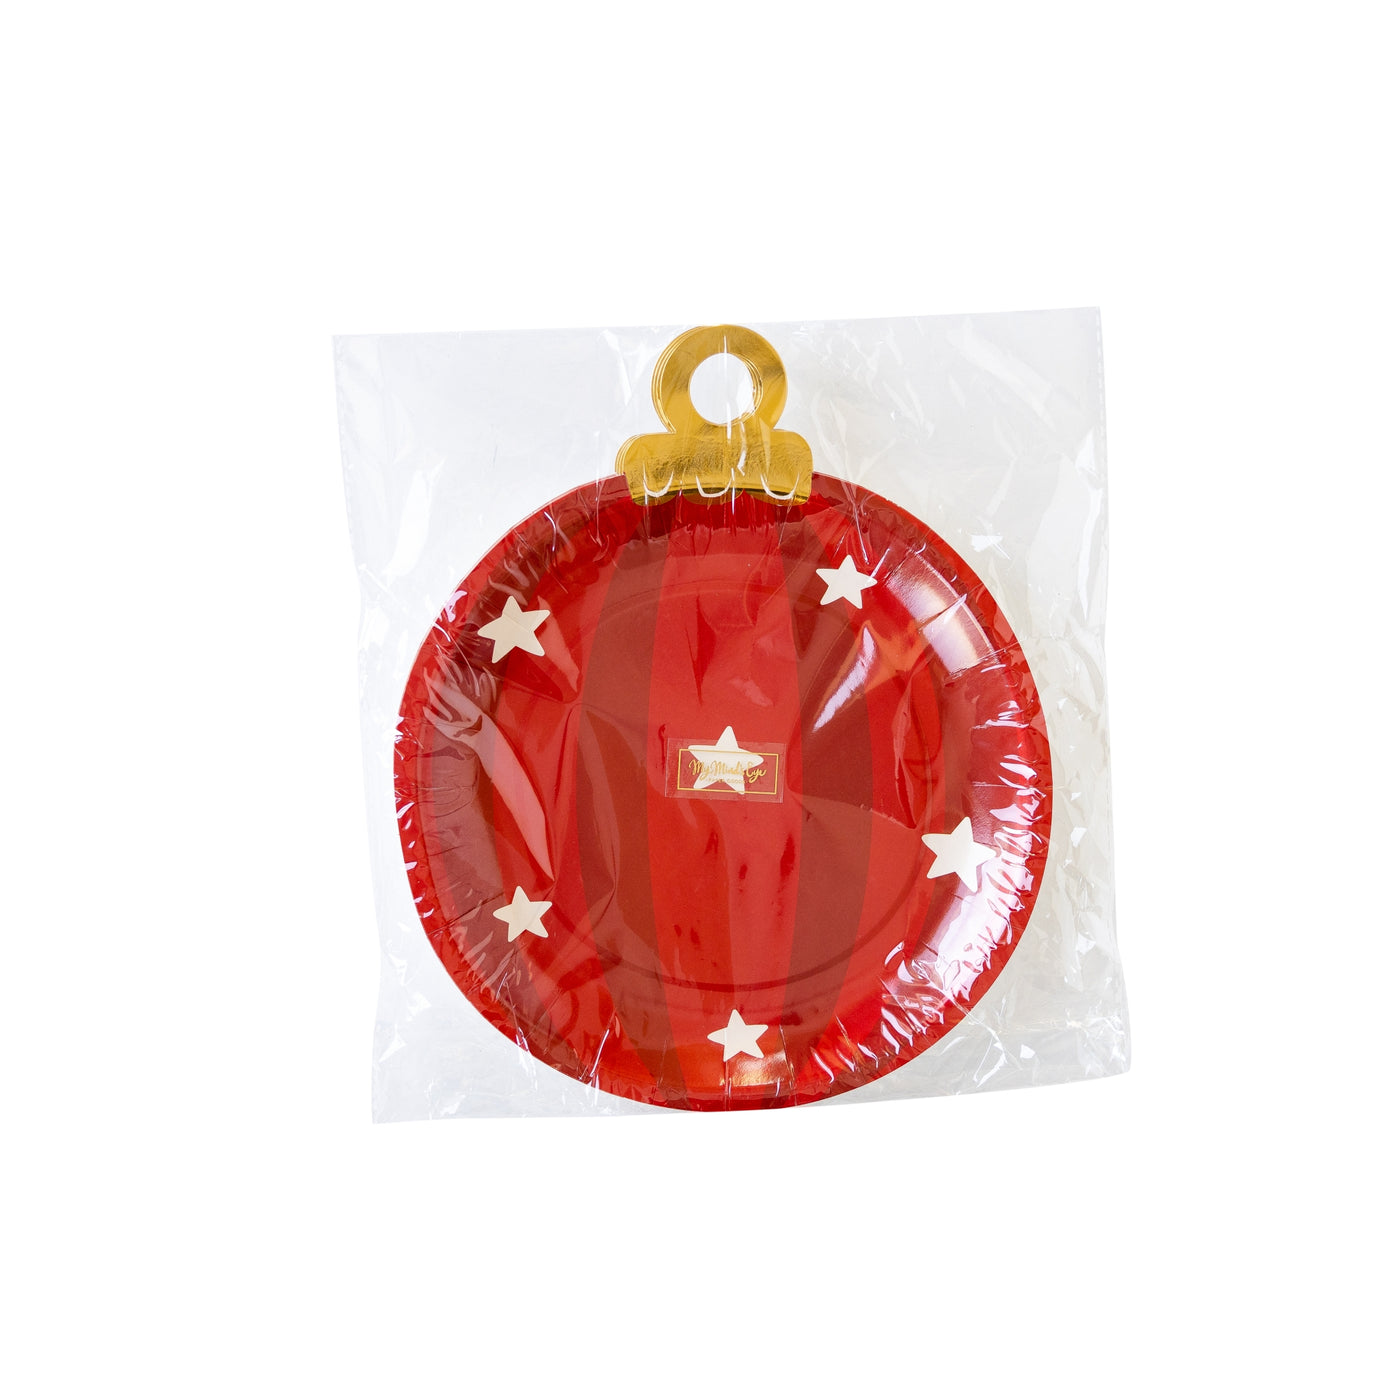 Believe Ornament Shaped Paper Plate